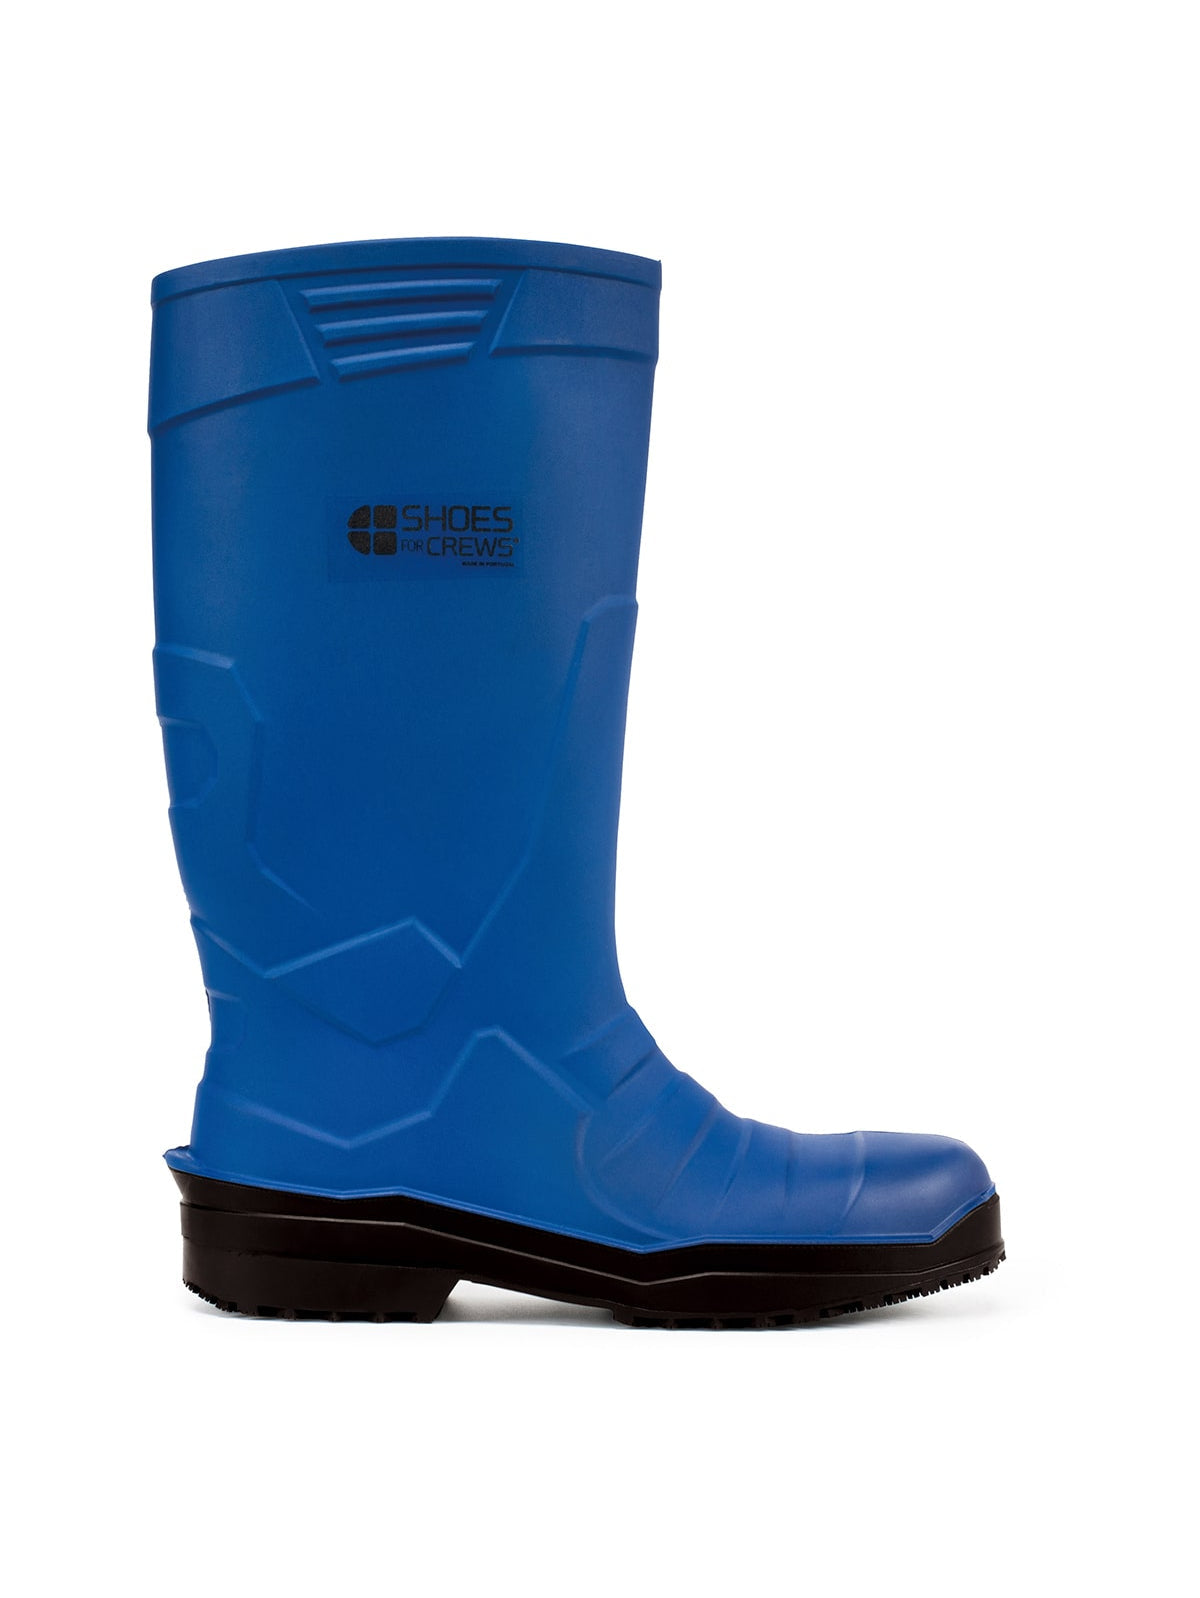 Unisex Safety Boot Sentinel Blue (S4) by Shoes For Crews -  ChefsCotton